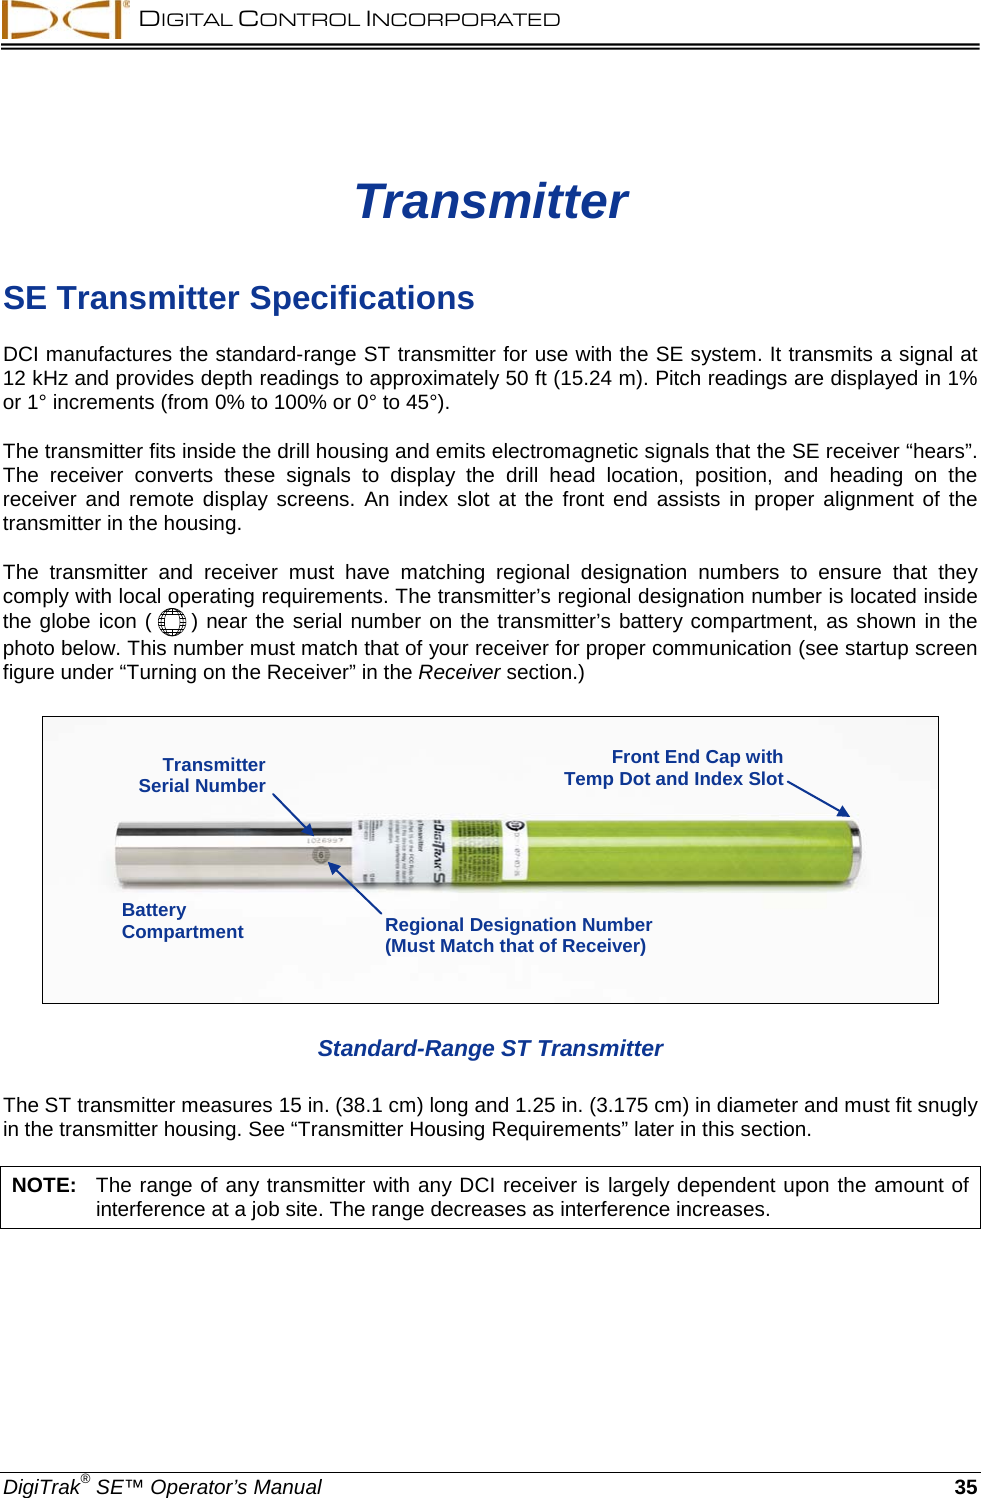  DIGITAL CONTROL INCORPORATED  DigiTrak® SE™ Operator’s Manual 35 Transmitter SE Transmitter Specifications DCI manufactures the standard-range ST transmitter for use with the SE system. It transmits a signal at 12 kHz and provides depth readings to approximately 50 ft (15.24 m). Pitch readings are displayed in 1% or 1° increments (from 0% to 100% or 0° to 45°).  The transmitter fits inside the drill housing and emits electromagnetic signals that the SE receiver “hears”. The receiver converts  these signals to display the drill head location, position, and heading on the receiver and remote display screens.  An index slot at the front end assists in proper alignment of the transmitter in the housing.  The transmitter and receiver must have matching regional  designation numbers to ensure that they comply with local operating requirements. The transmitter’s regional designation number is located inside the globe icon (  ) near the serial number on the transmitter’s battery compartment, as shown in the photo below. This number must match that of your receiver for proper communication (see startup screen figure under “Turning on the Receiver” in the Receiver section.)   Standard-Range ST Transmitter The ST transmitter measures 15 in. (38.1 cm) long and 1.25 in. (3.175 cm) in diameter and must fit snugly in the transmitter housing. See “Transmitter Housing Requirements” later in this section. NOTE:   The range of any transmitter with any DCI receiver is largely dependent upon the amount of interference at a job site. The range decreases as interference increases. Transmitter  Serial Number Regional Designation Number (Must Match that of Receiver) Battery Compartment Front End Cap with Temp Dot and Index Slot 